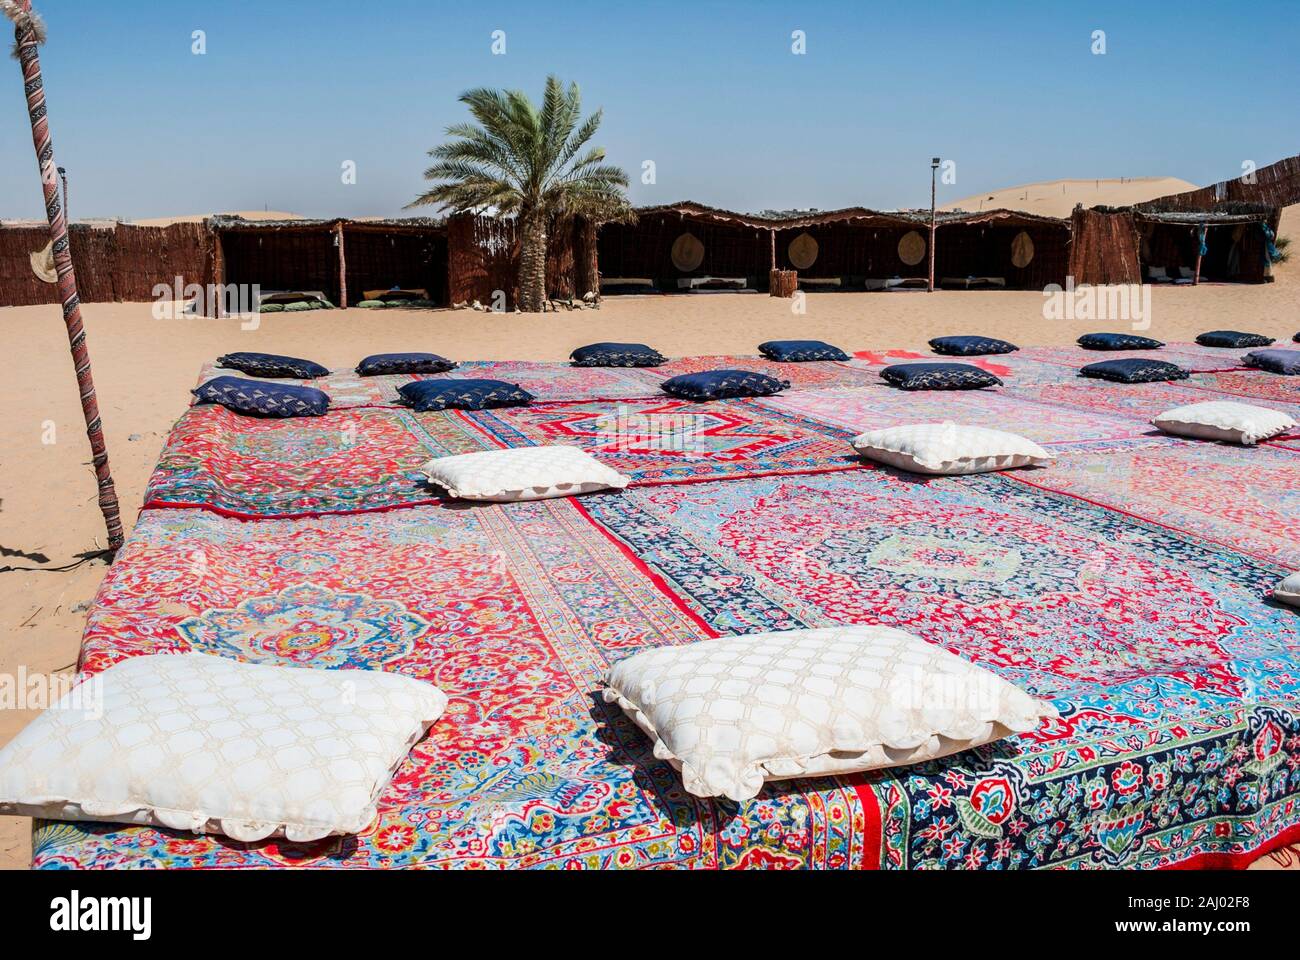 Arabic barbecue lunch stop as part of a desert safari excursion. Abu Dhabi, United Arab Emirates. Stock Photo